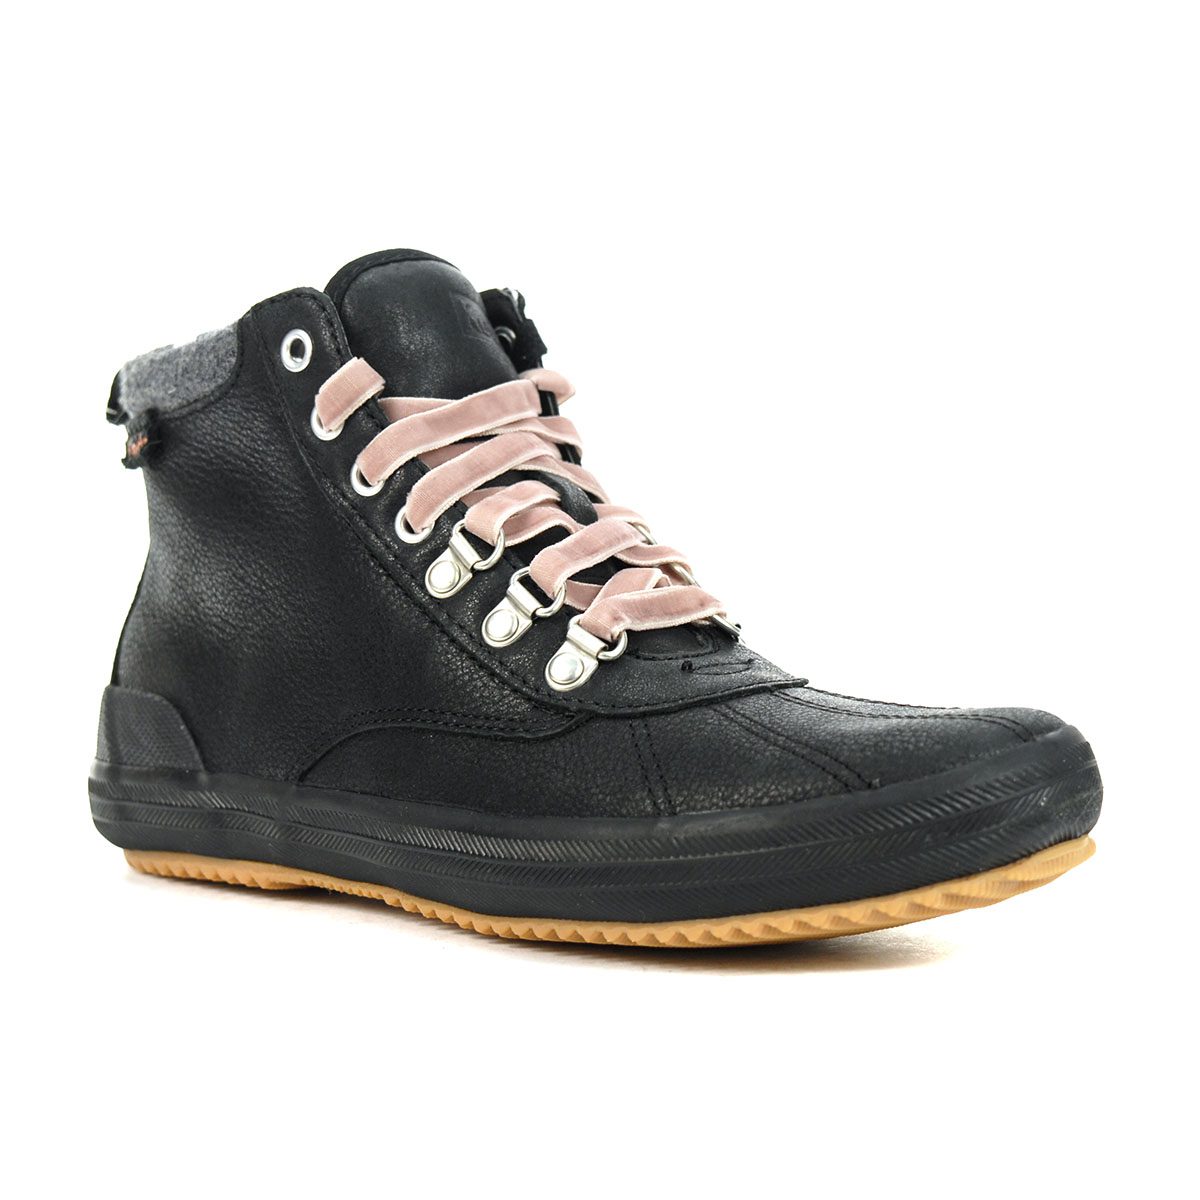 Keds Women's Scout II Black, Leather and Wool Boots WH61660 - WOOKI.COM